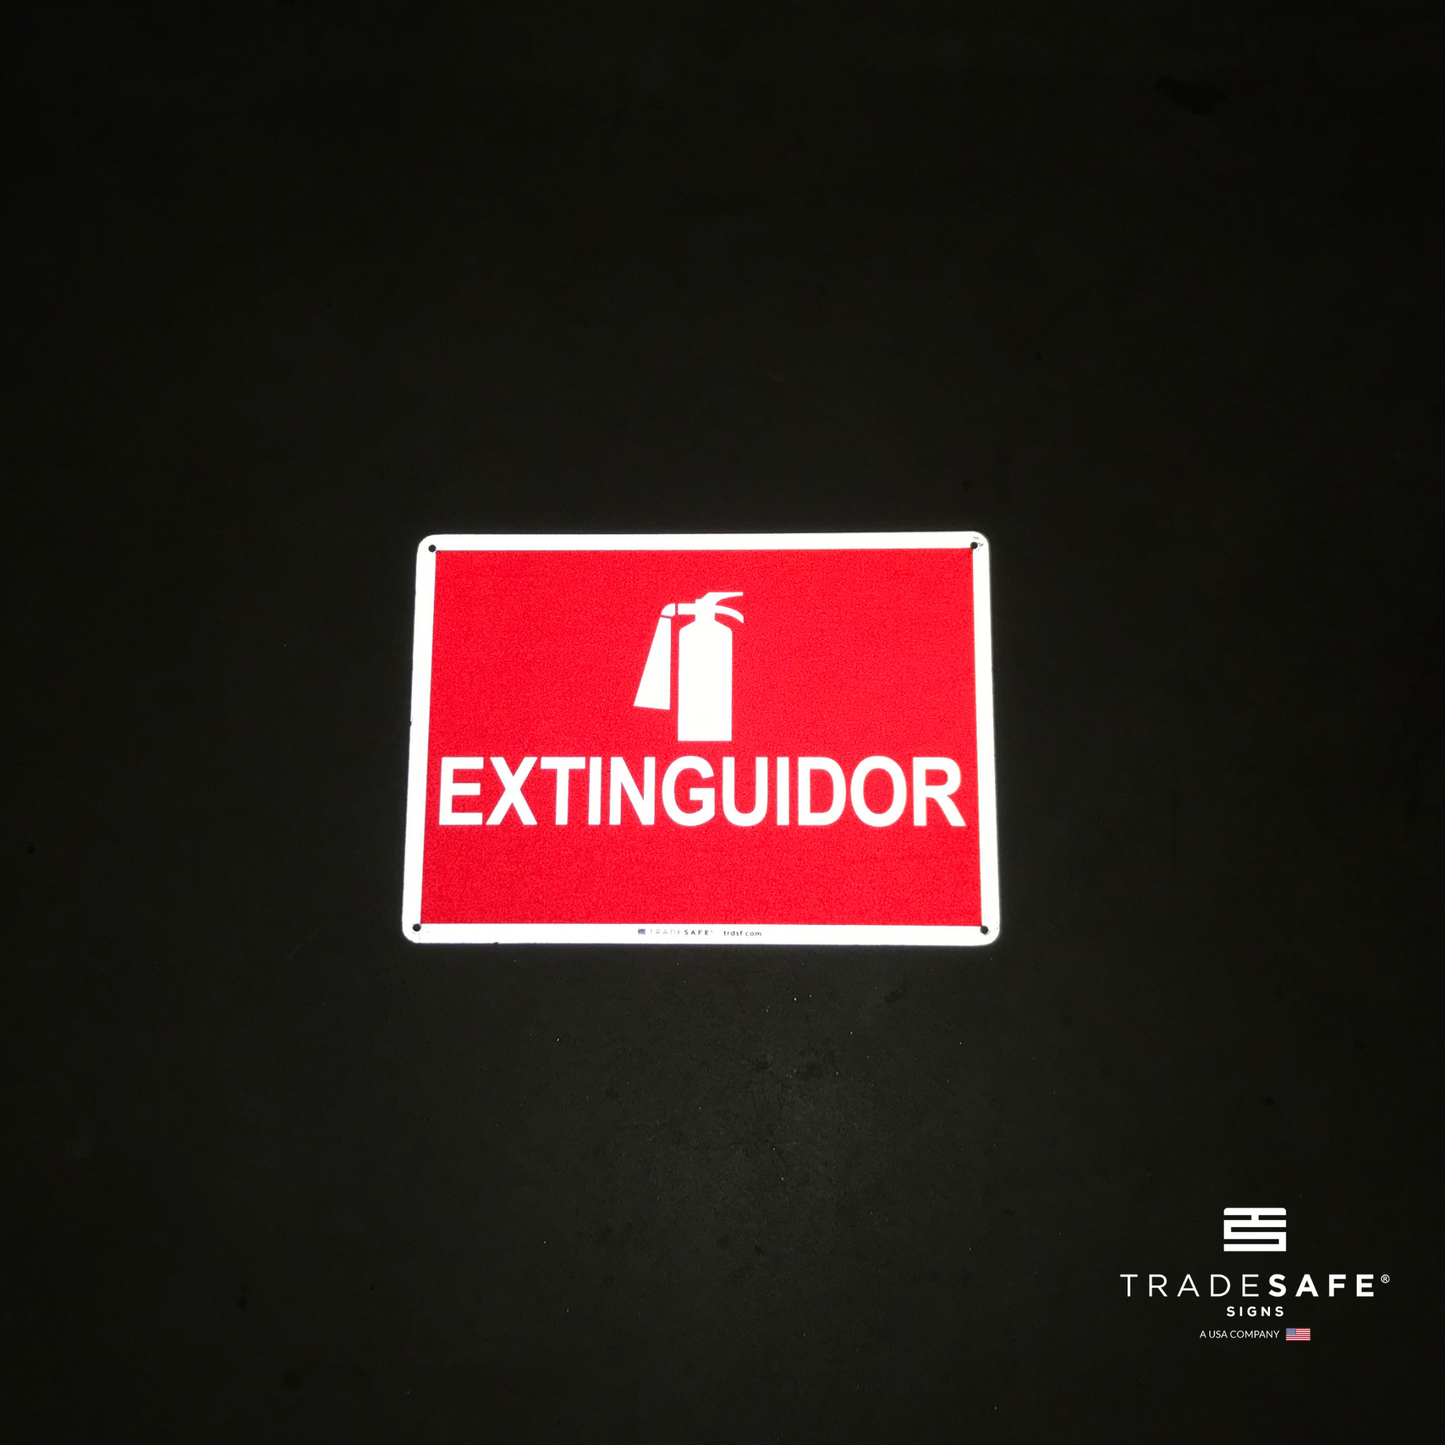 reflective attribute of extinguidor sign on black background